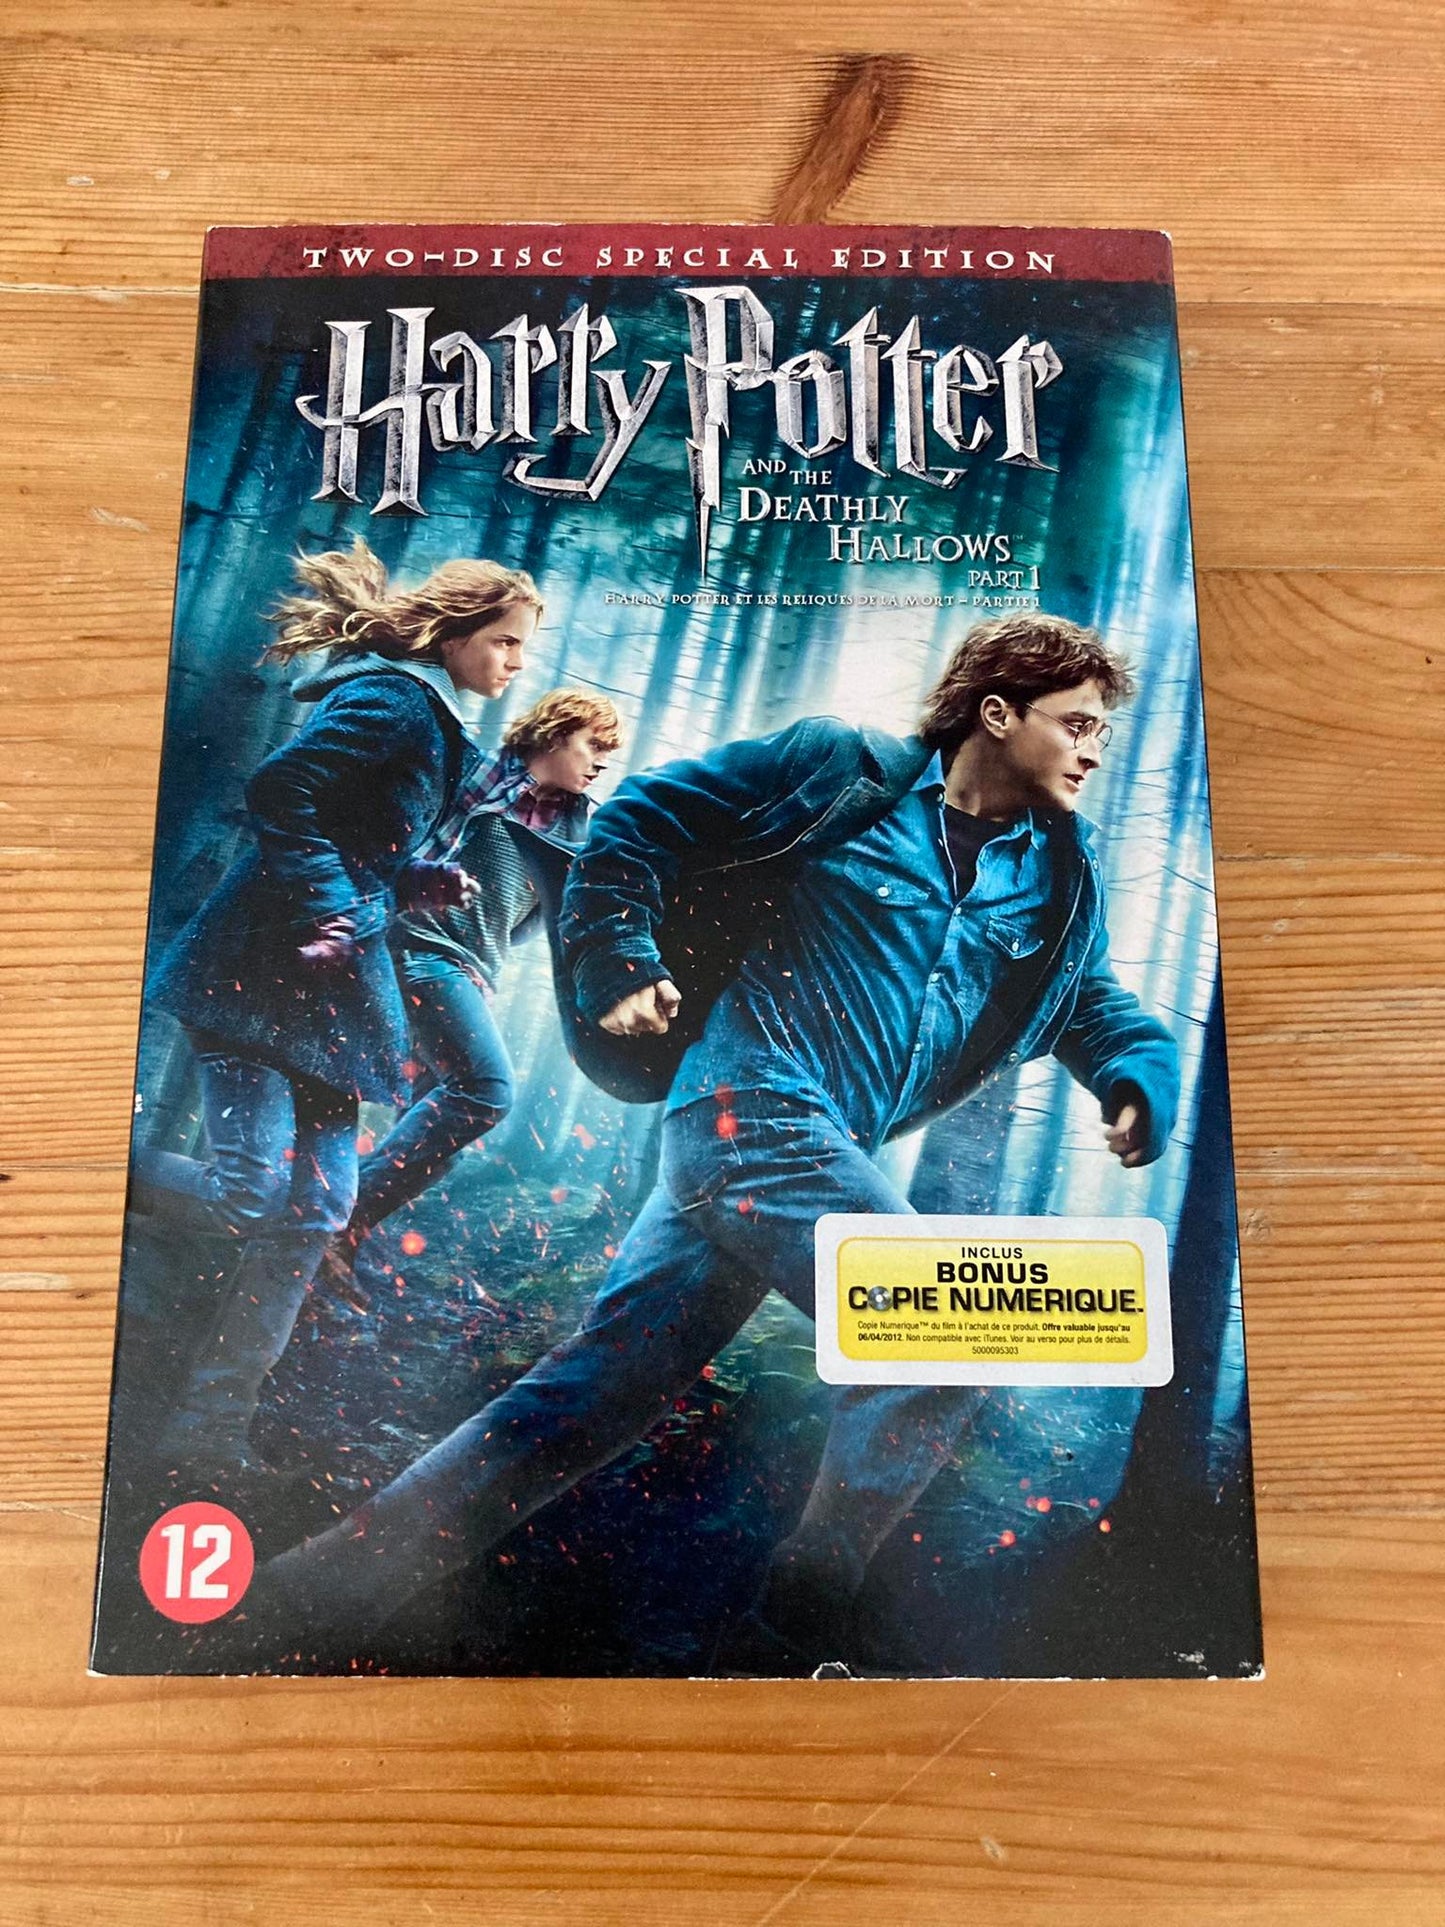 DvD Harry Potter and the Deathly Hallows - Part 1 - Special Edition 2 DVD